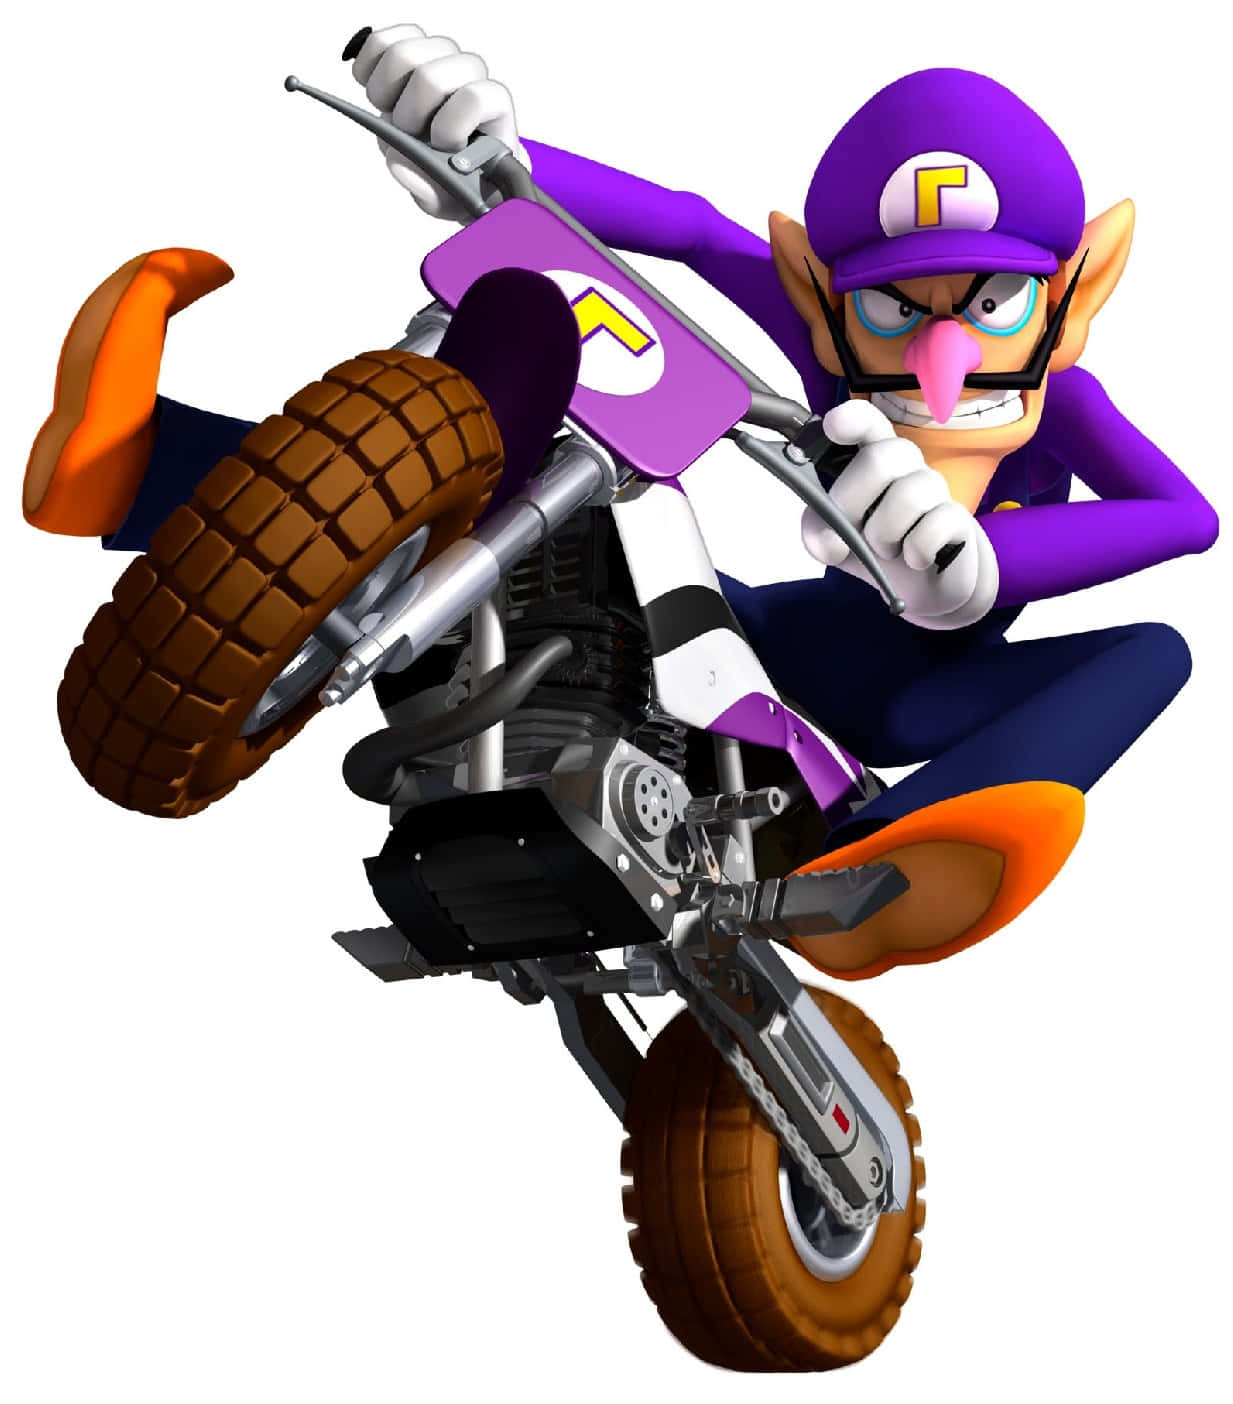 Waluigi Posing In His Iconic Style Against A Colorful Geometric Background. Wallpaper